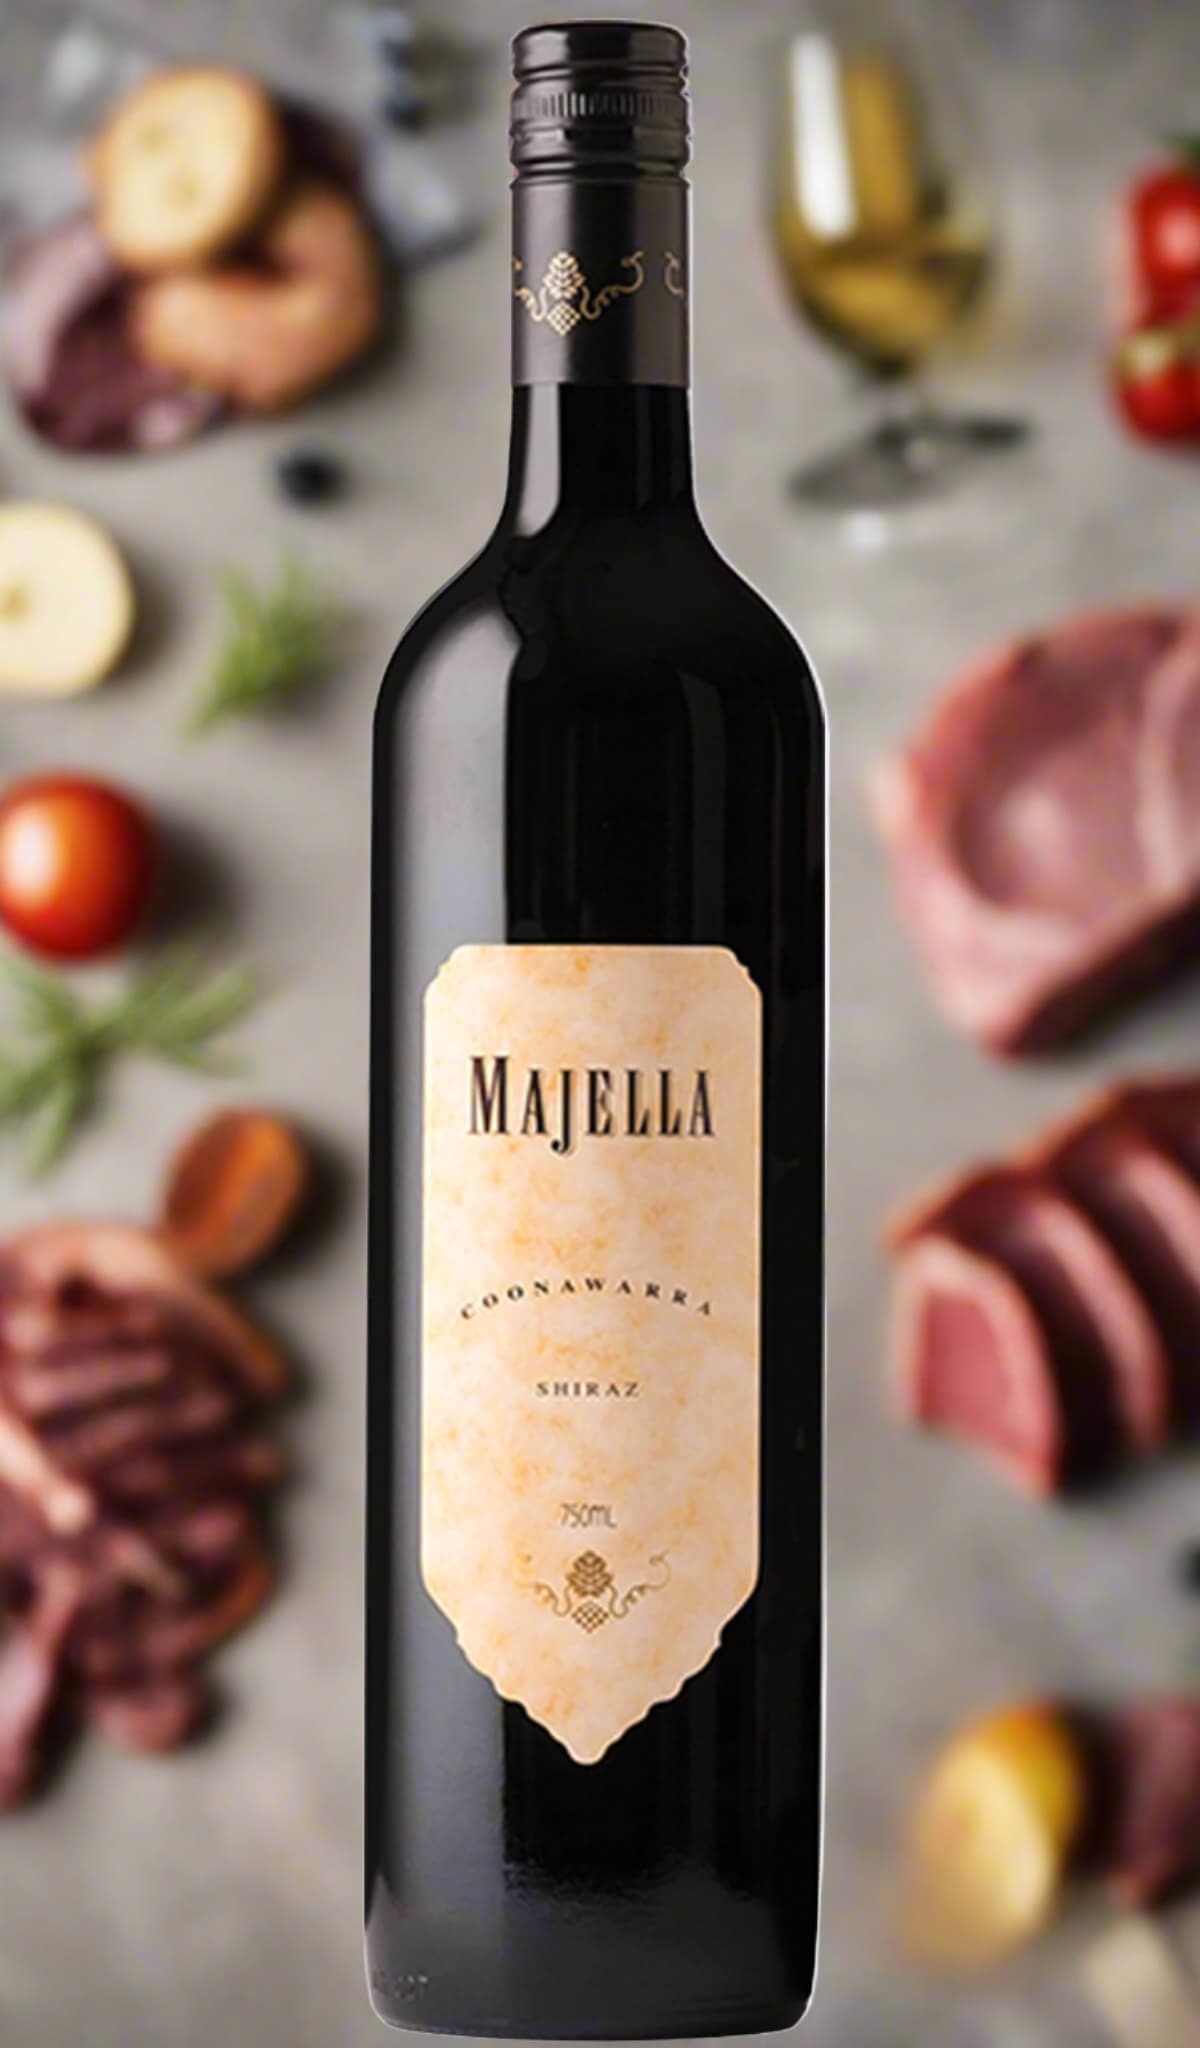 Find out more, explore the range and buy Majella Coonawarra Shiraz 2019 available online at Wine Sellers Direct - Australia's independent liquor specialists.